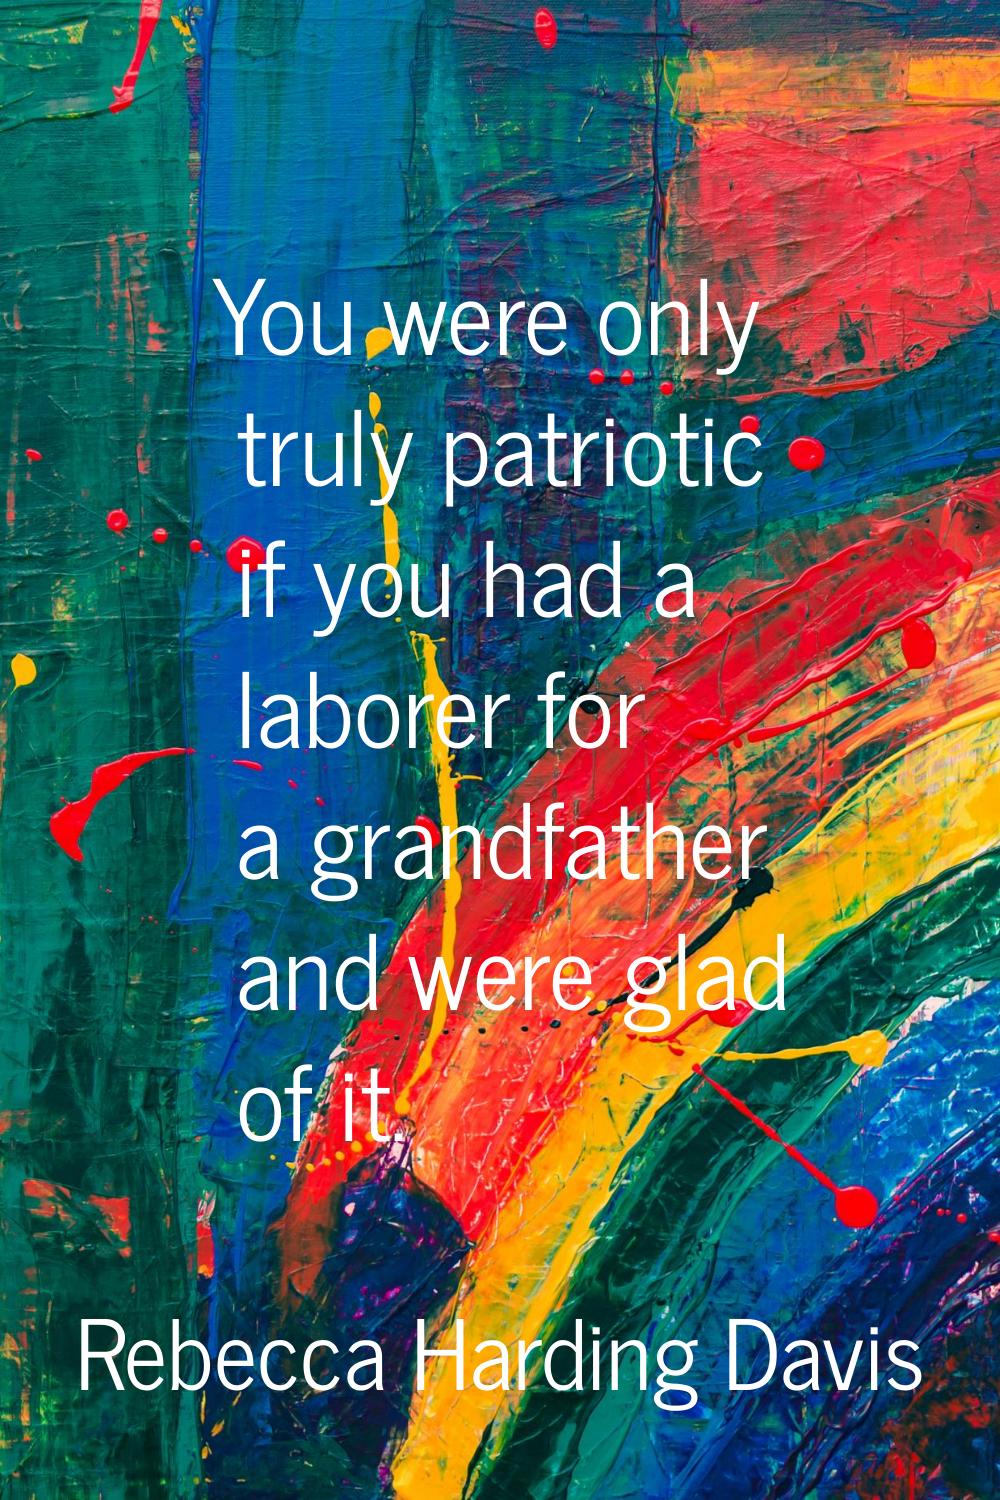 You were only truly patriotic if you had a laborer for a grandfather and were glad of it.